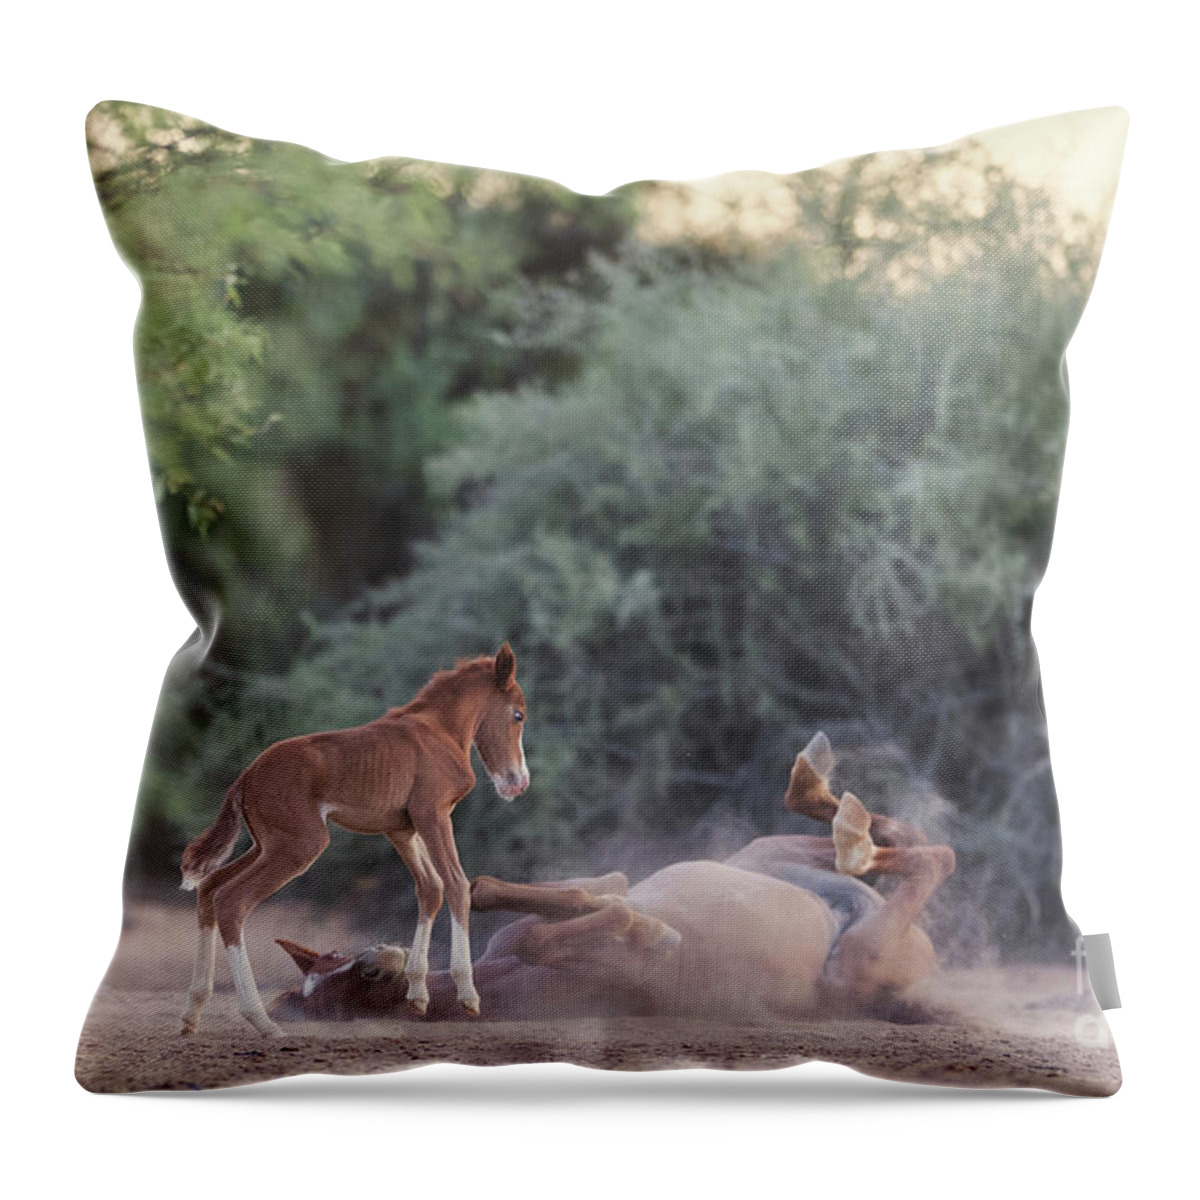 Cute Throw Pillow featuring the photograph Dirt Bath by Shannon Hastings